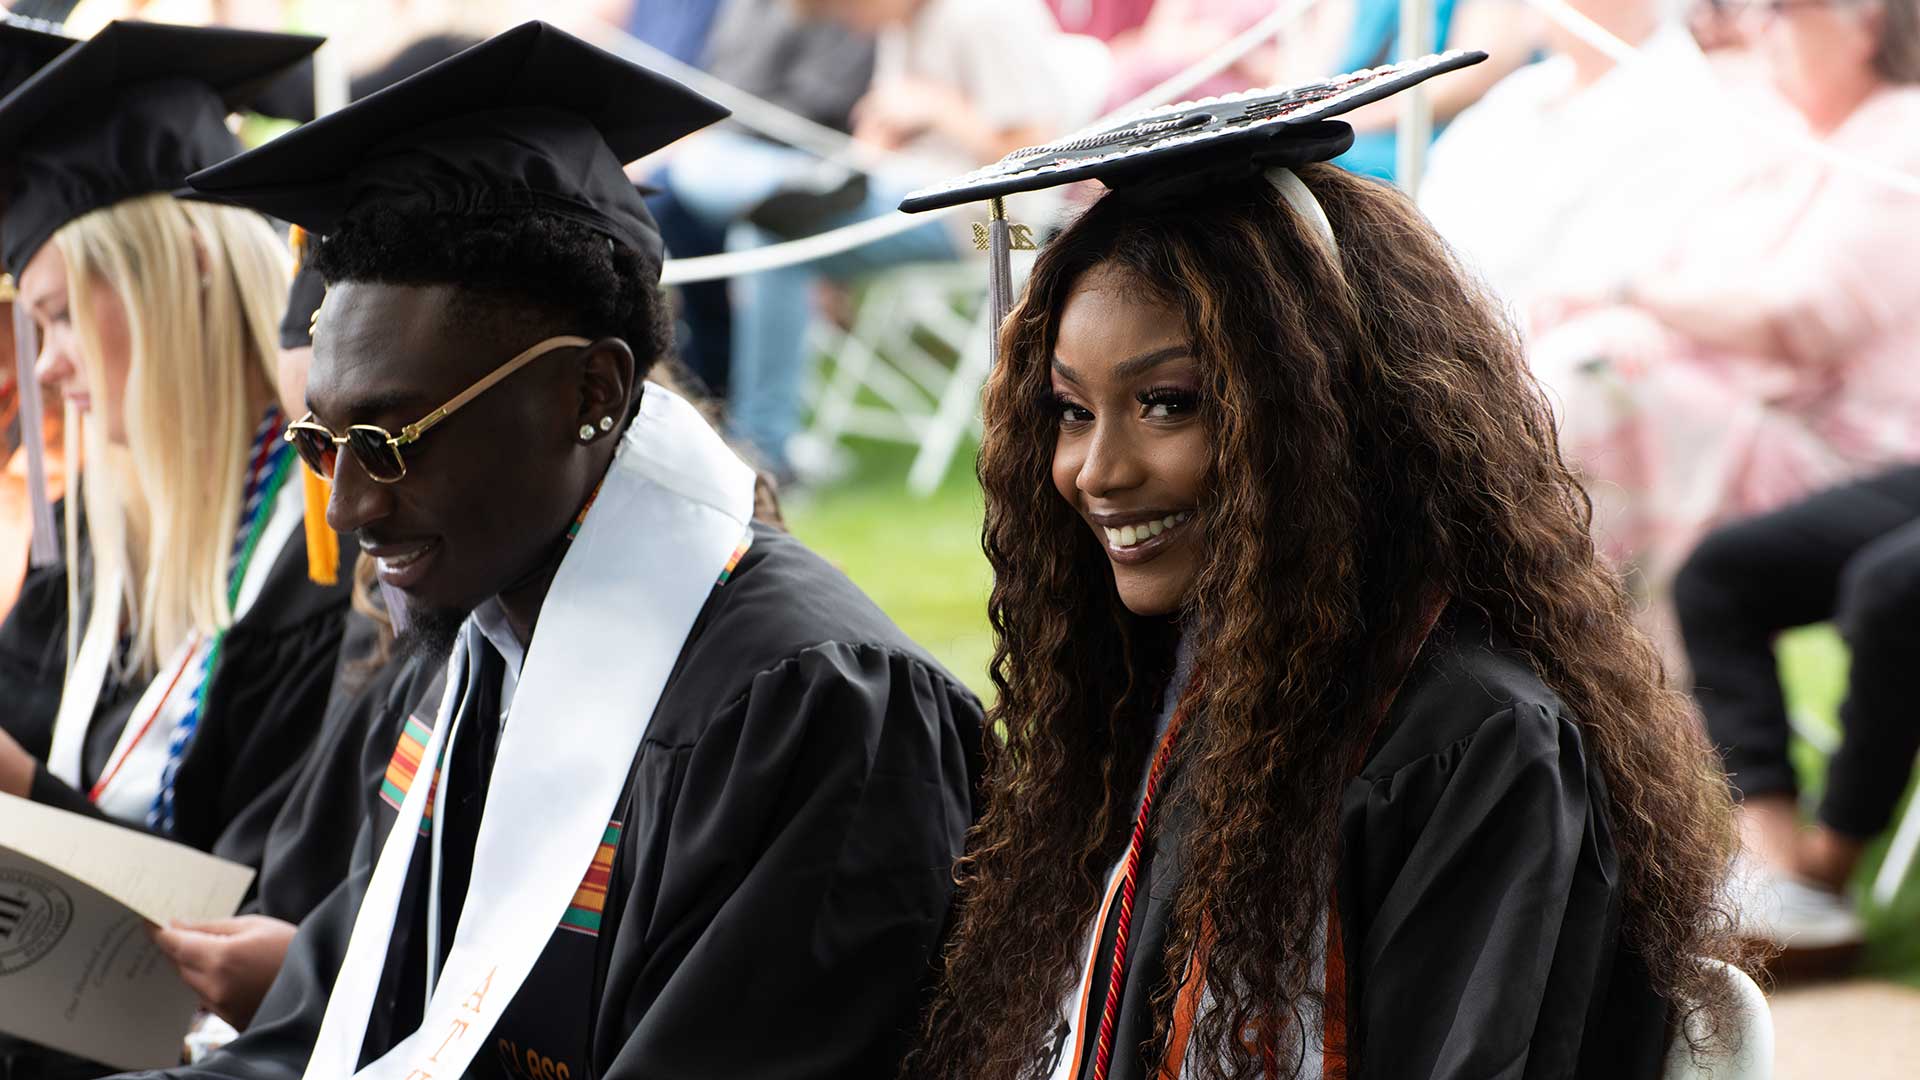 A black female student wearing graduation robes and cap smiles while waiting for the commencement ceremony to begin.